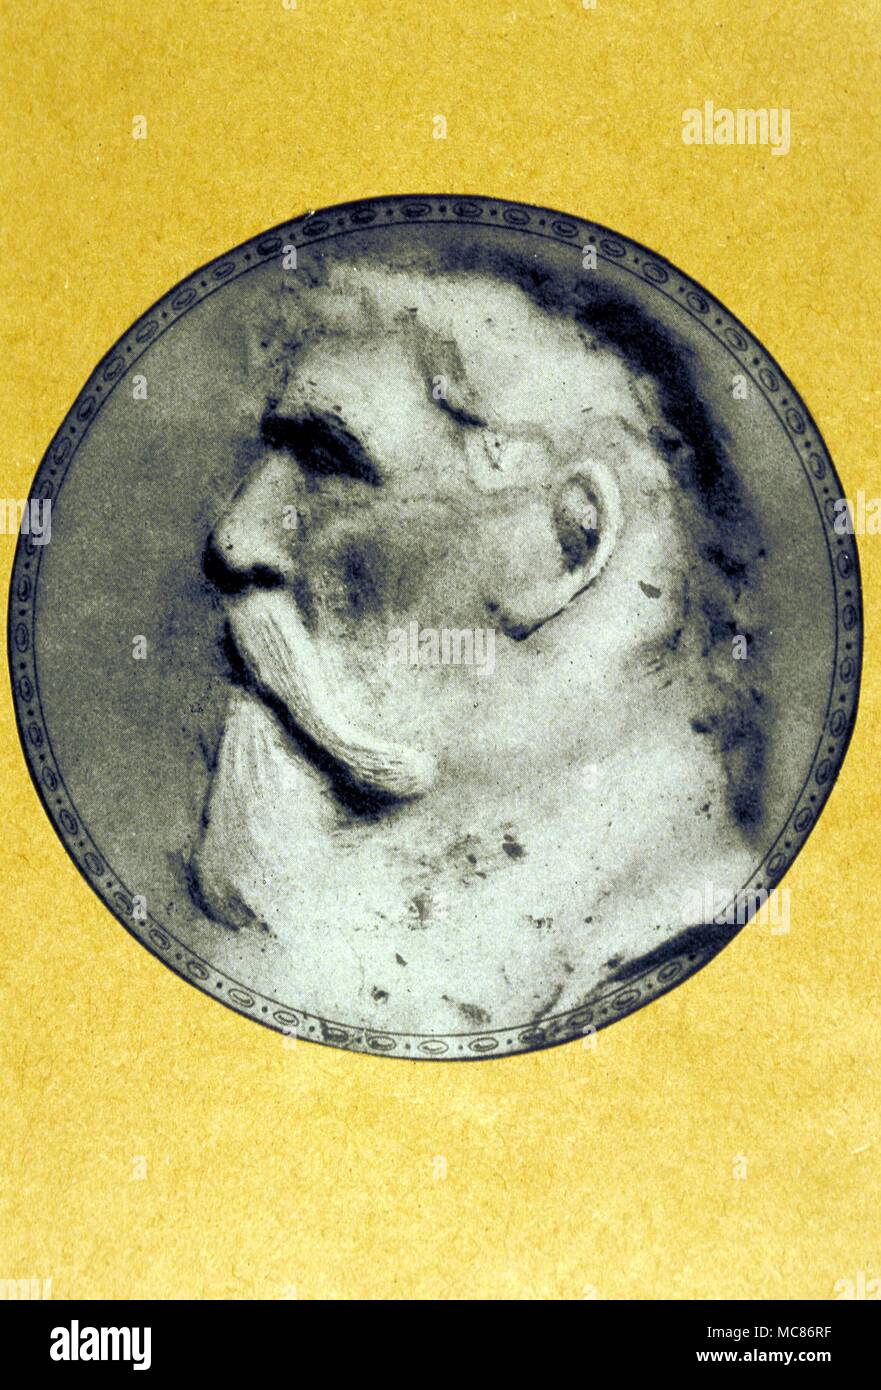 Psychic Phenomena Plaster cast of a spirit head taken in a seance held by Frau Silbert, c. 1919. The cast is said to be a portrait of Dr Nell, the spirit guide: event and image recorded in 'Ubersinnlichen Welt', 1919 Stock Photo